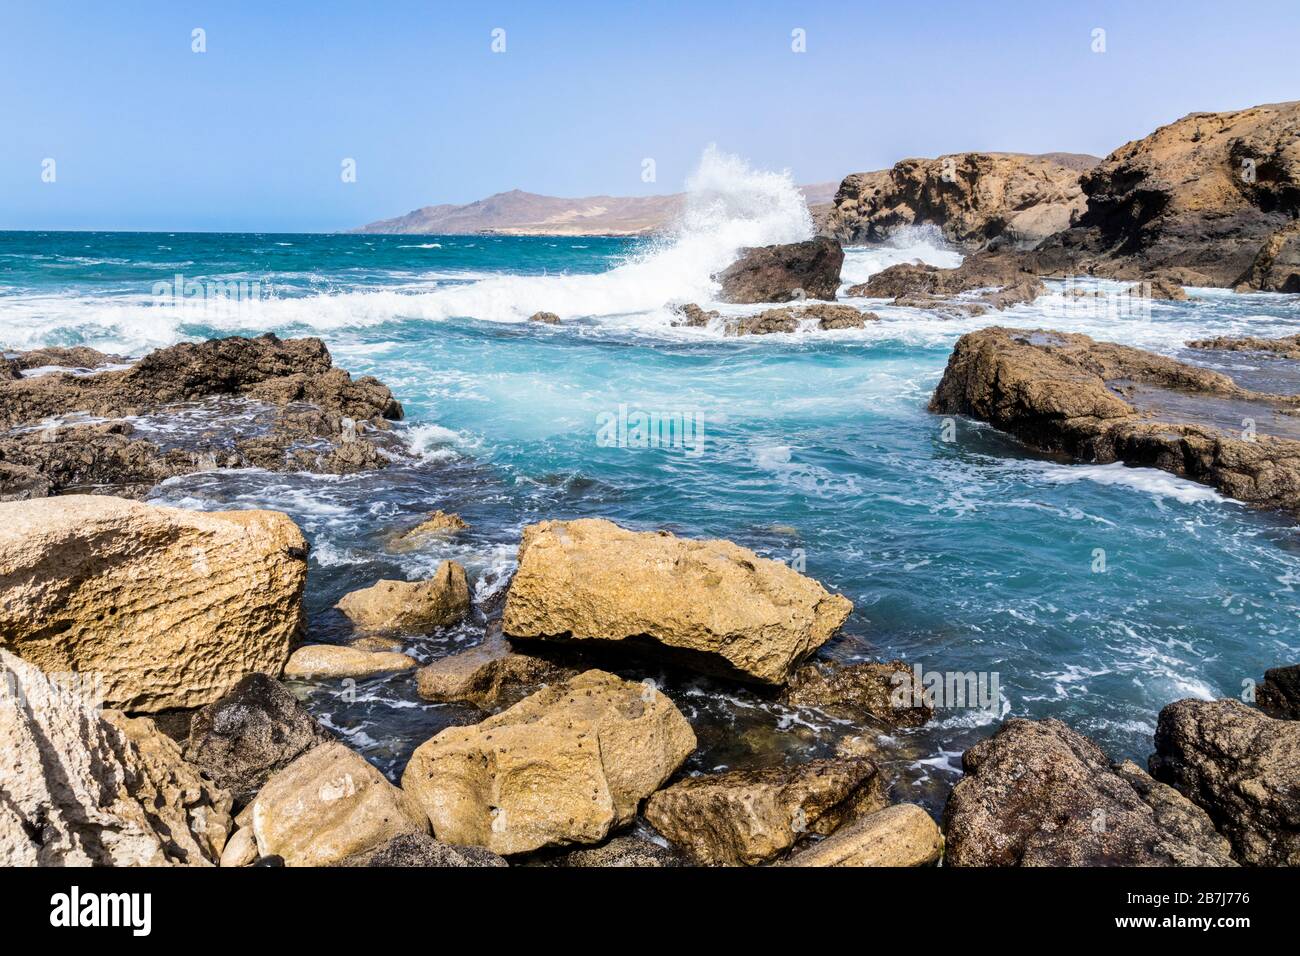 Heavy Atlantic waves breaking on rocks on the beach at La Pared on the west coast of the Canary Island of Fuerteventura Stock Photo